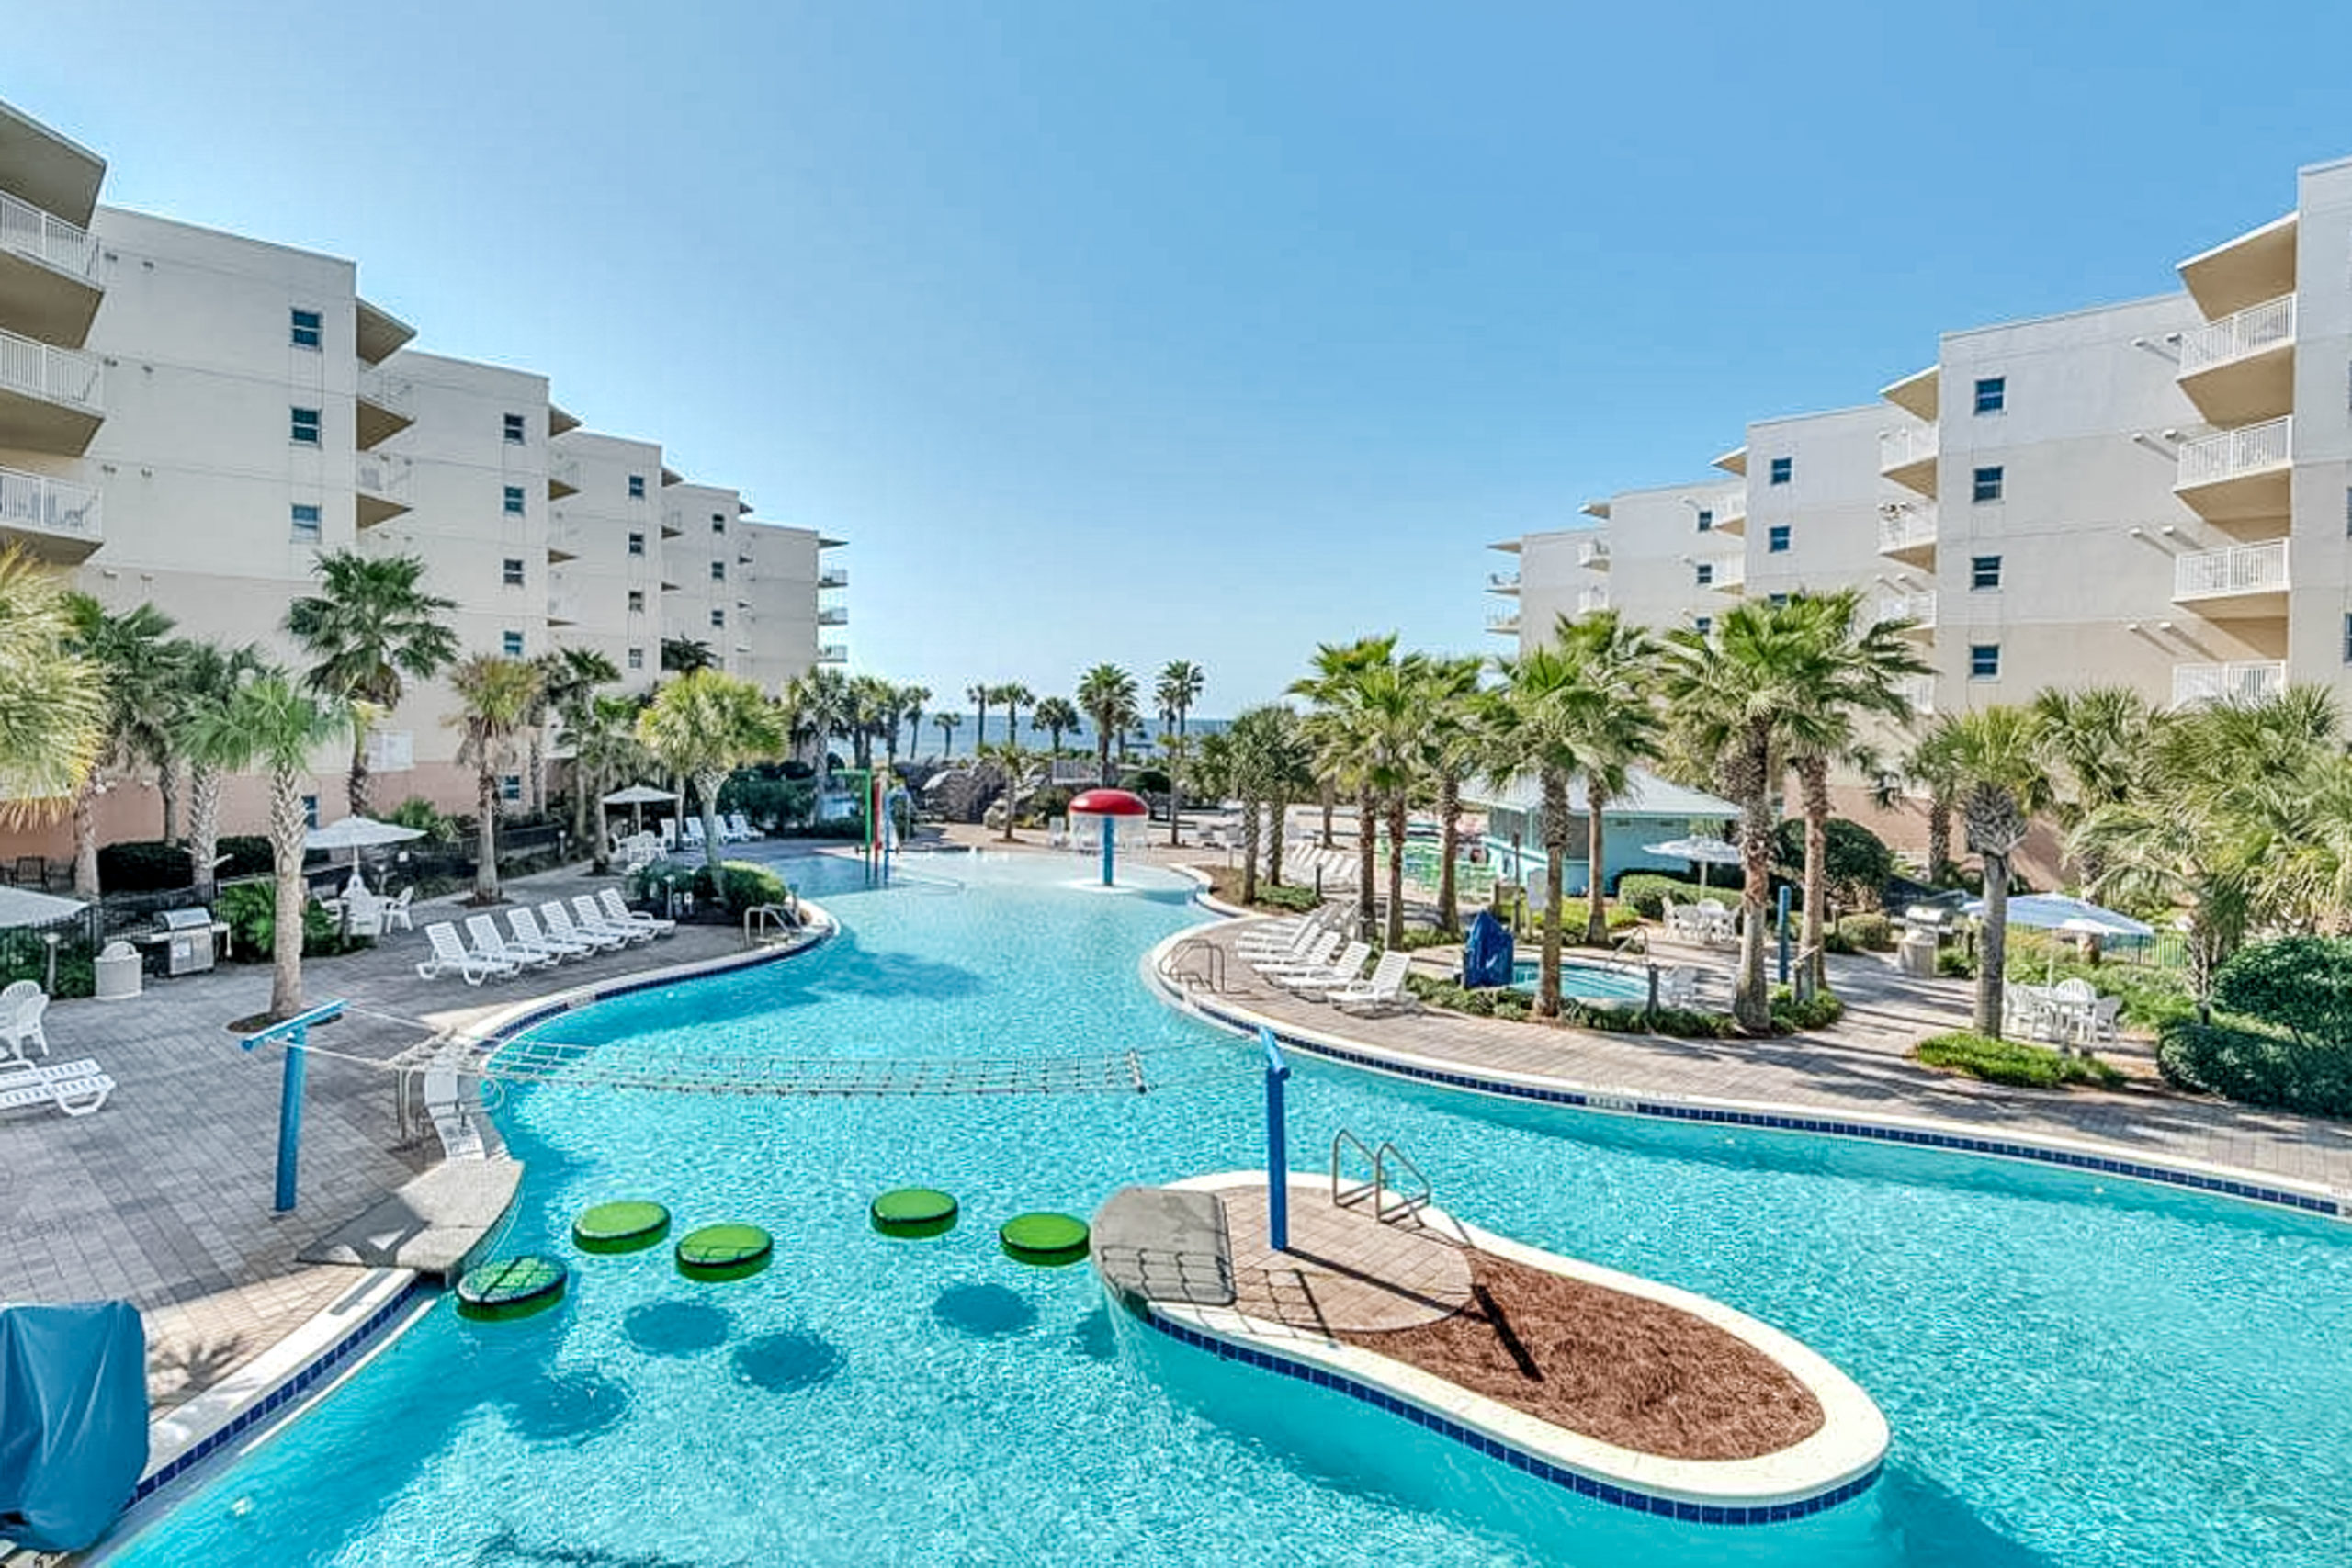 Multiple pools and lazy river at Waterscape Resort